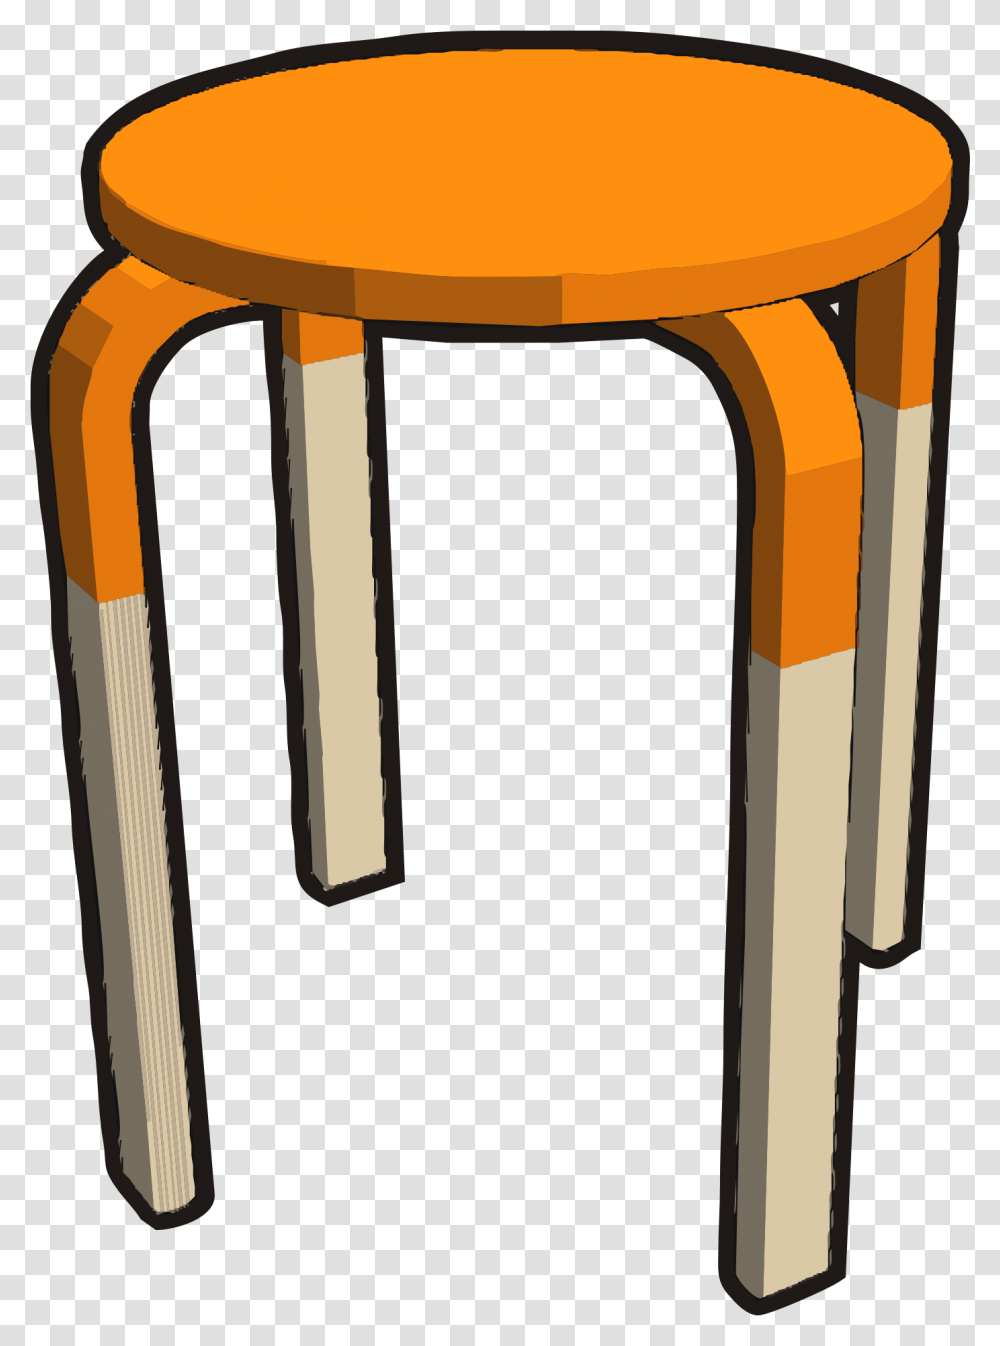 Frosta Stool Half Orange Clip Arts Stool Clipart Black And White, Furniture, Bar Stool, Table, Chair Transparent Png